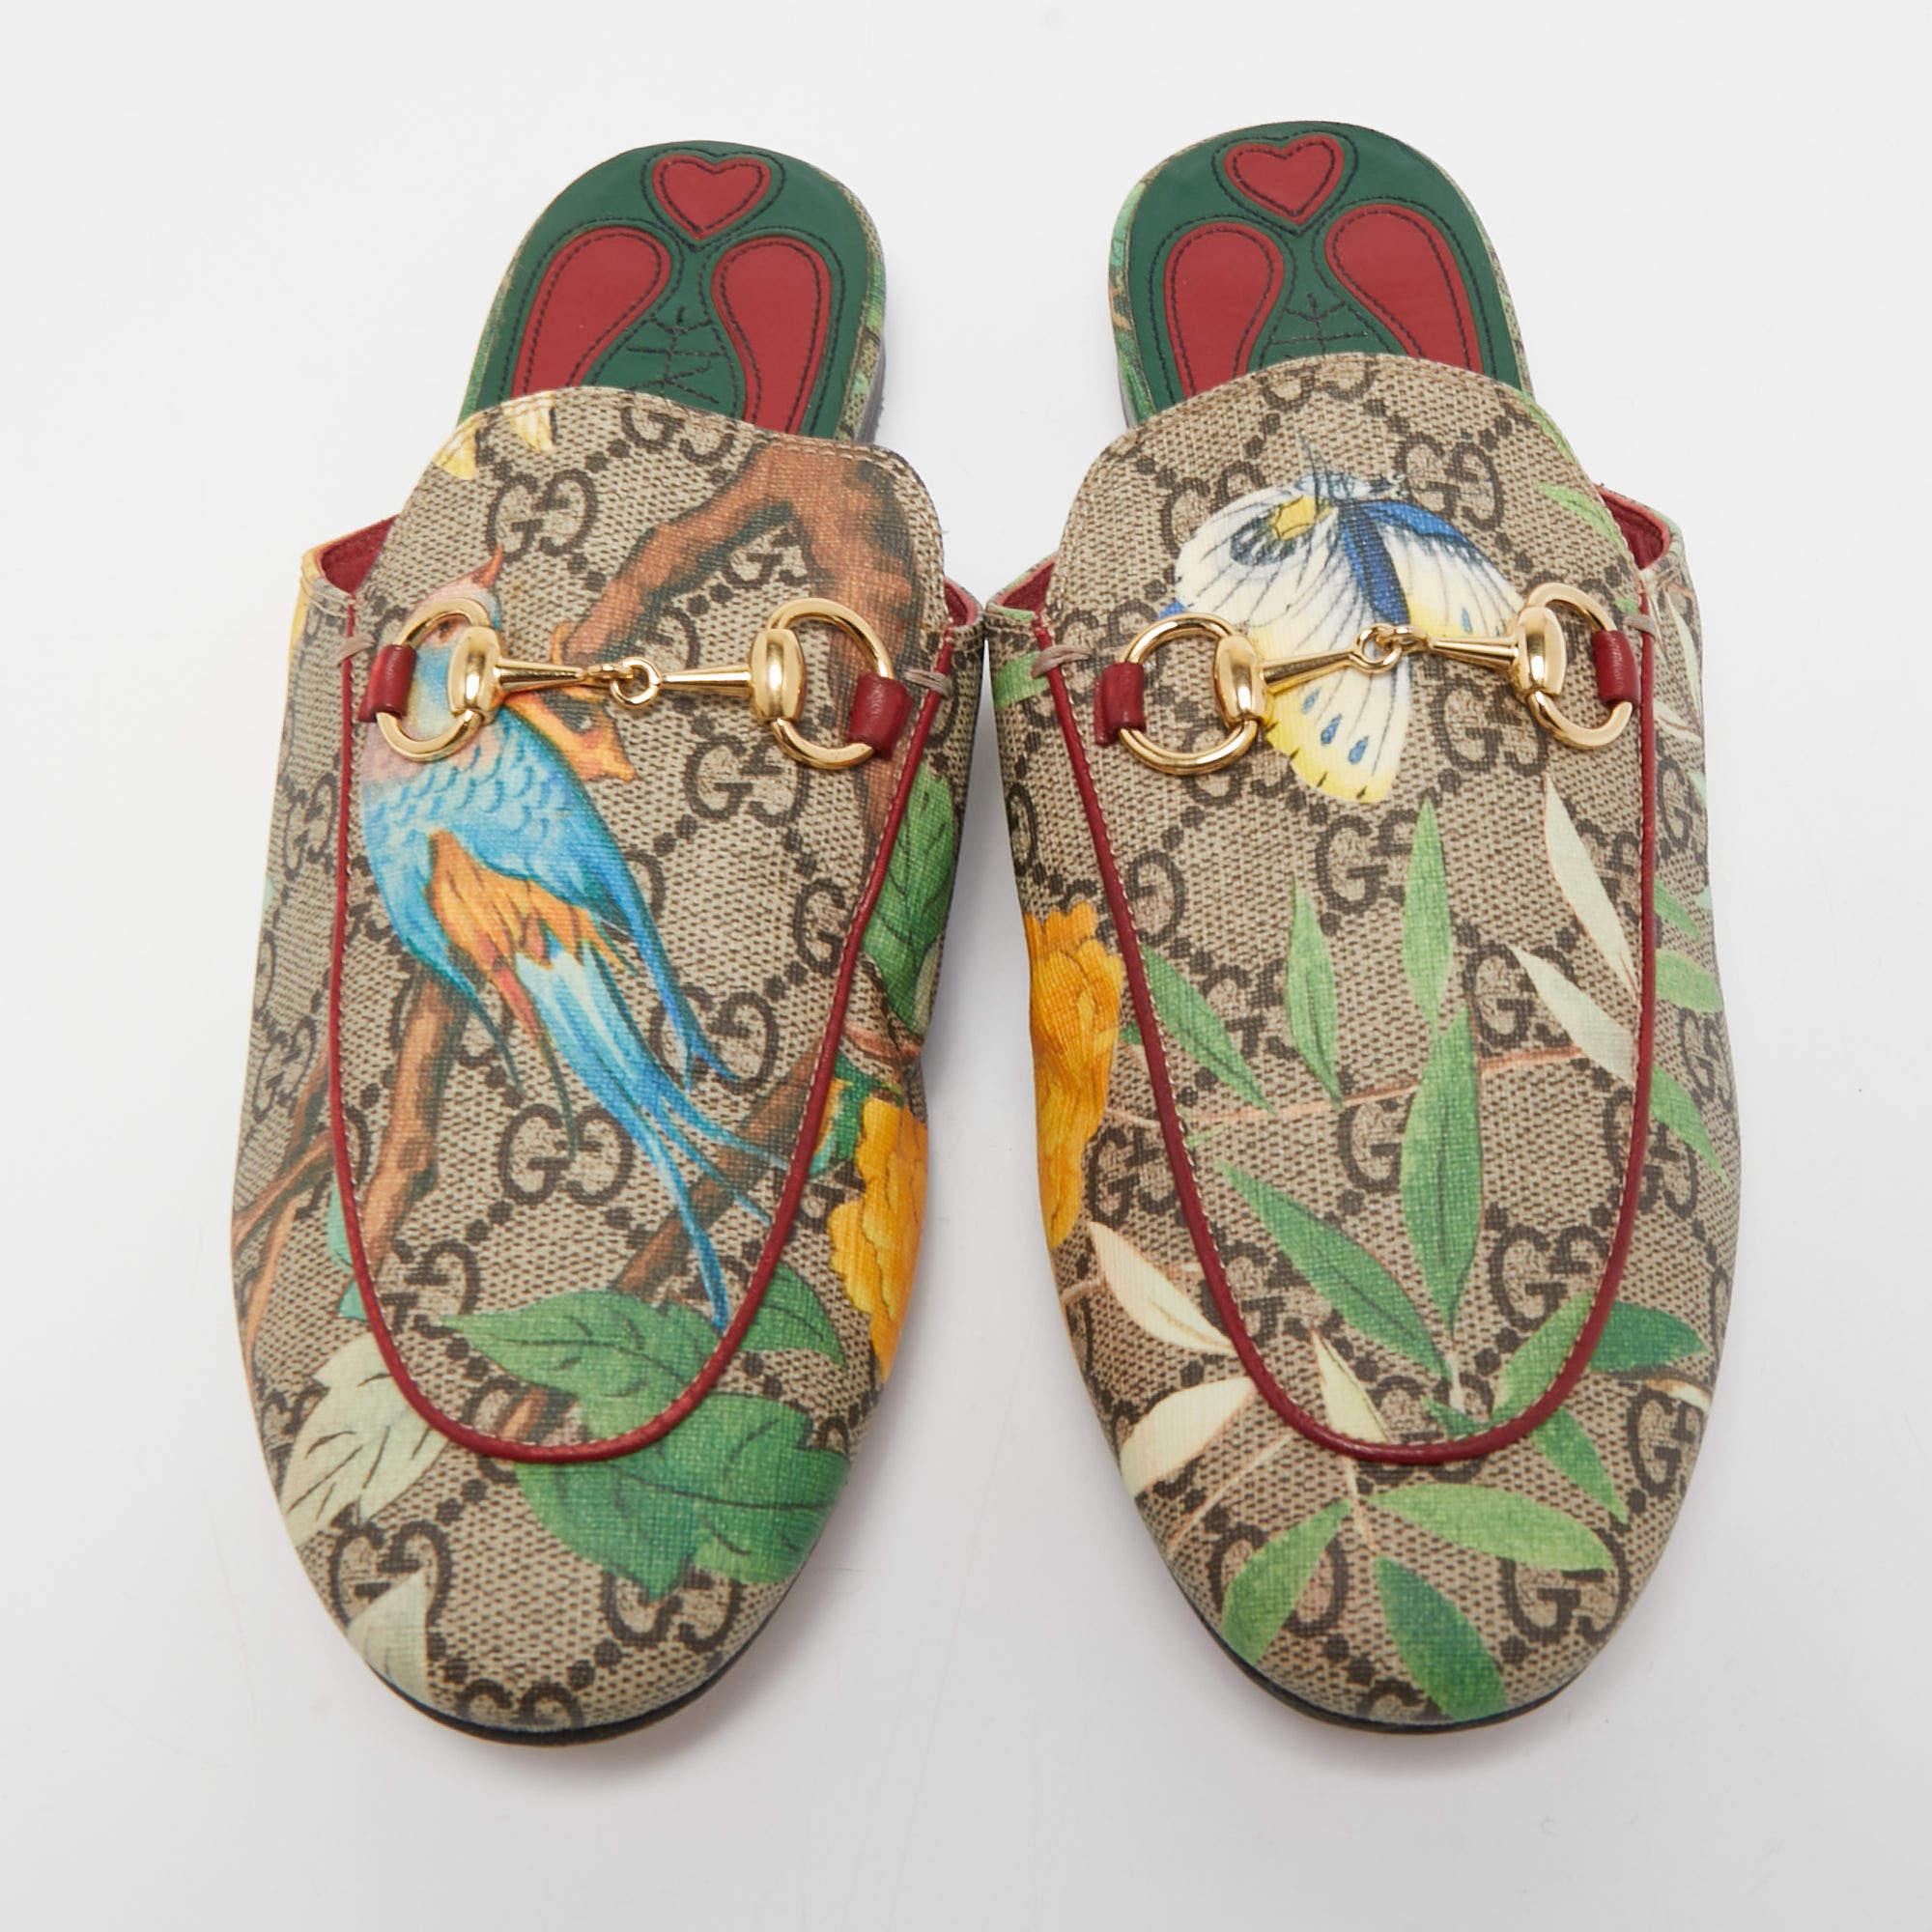 These Gucci Princetown mules signify luxury and practicality. An ultimate favorite of style enthusiasts, its silhouette has the luxe touch of the Horsebit motif on the uppers.

